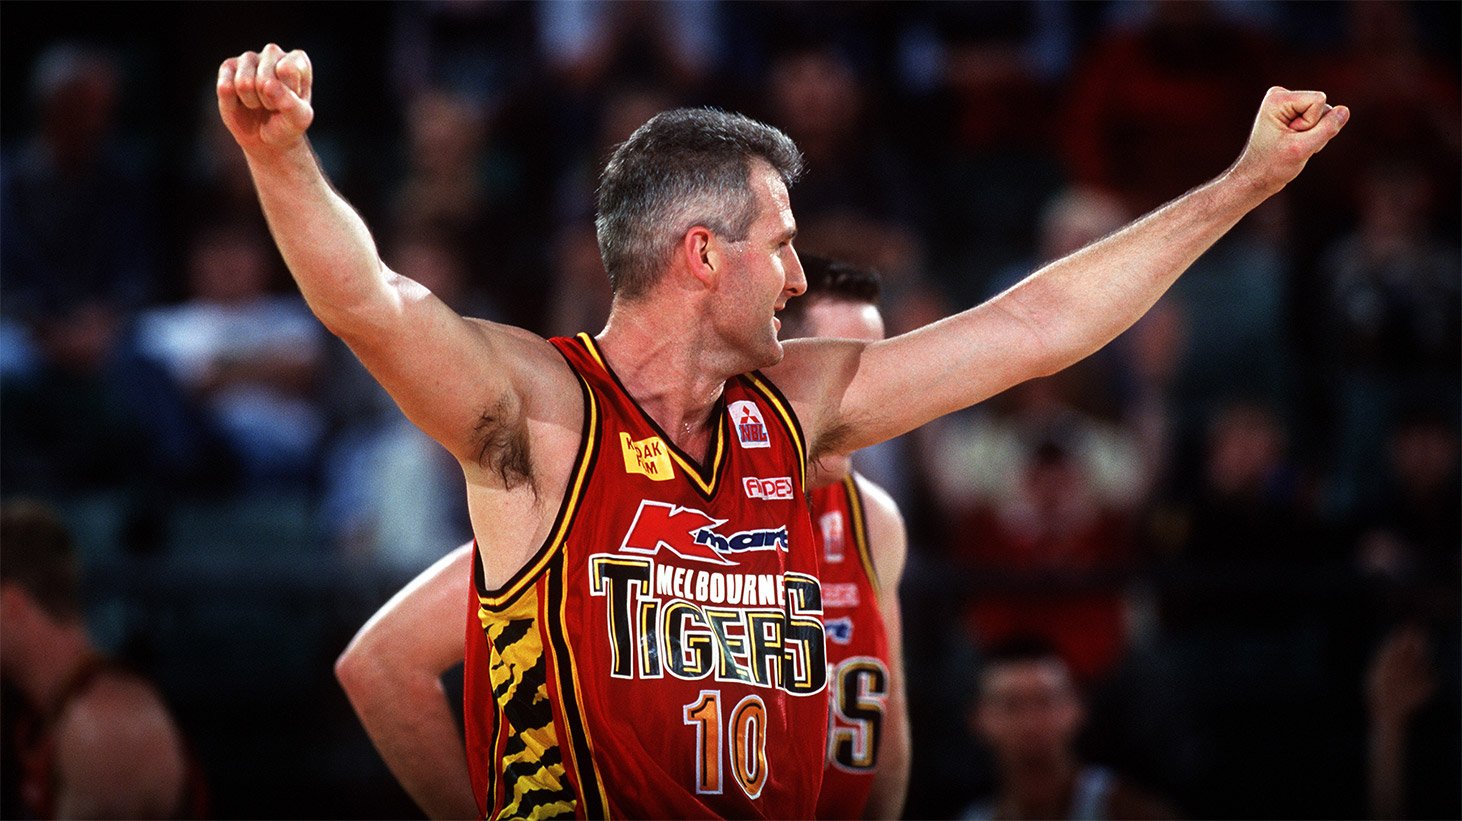 Melbourne Tigers Throwback Jersey - Andrew Gaze– Official NBL Store